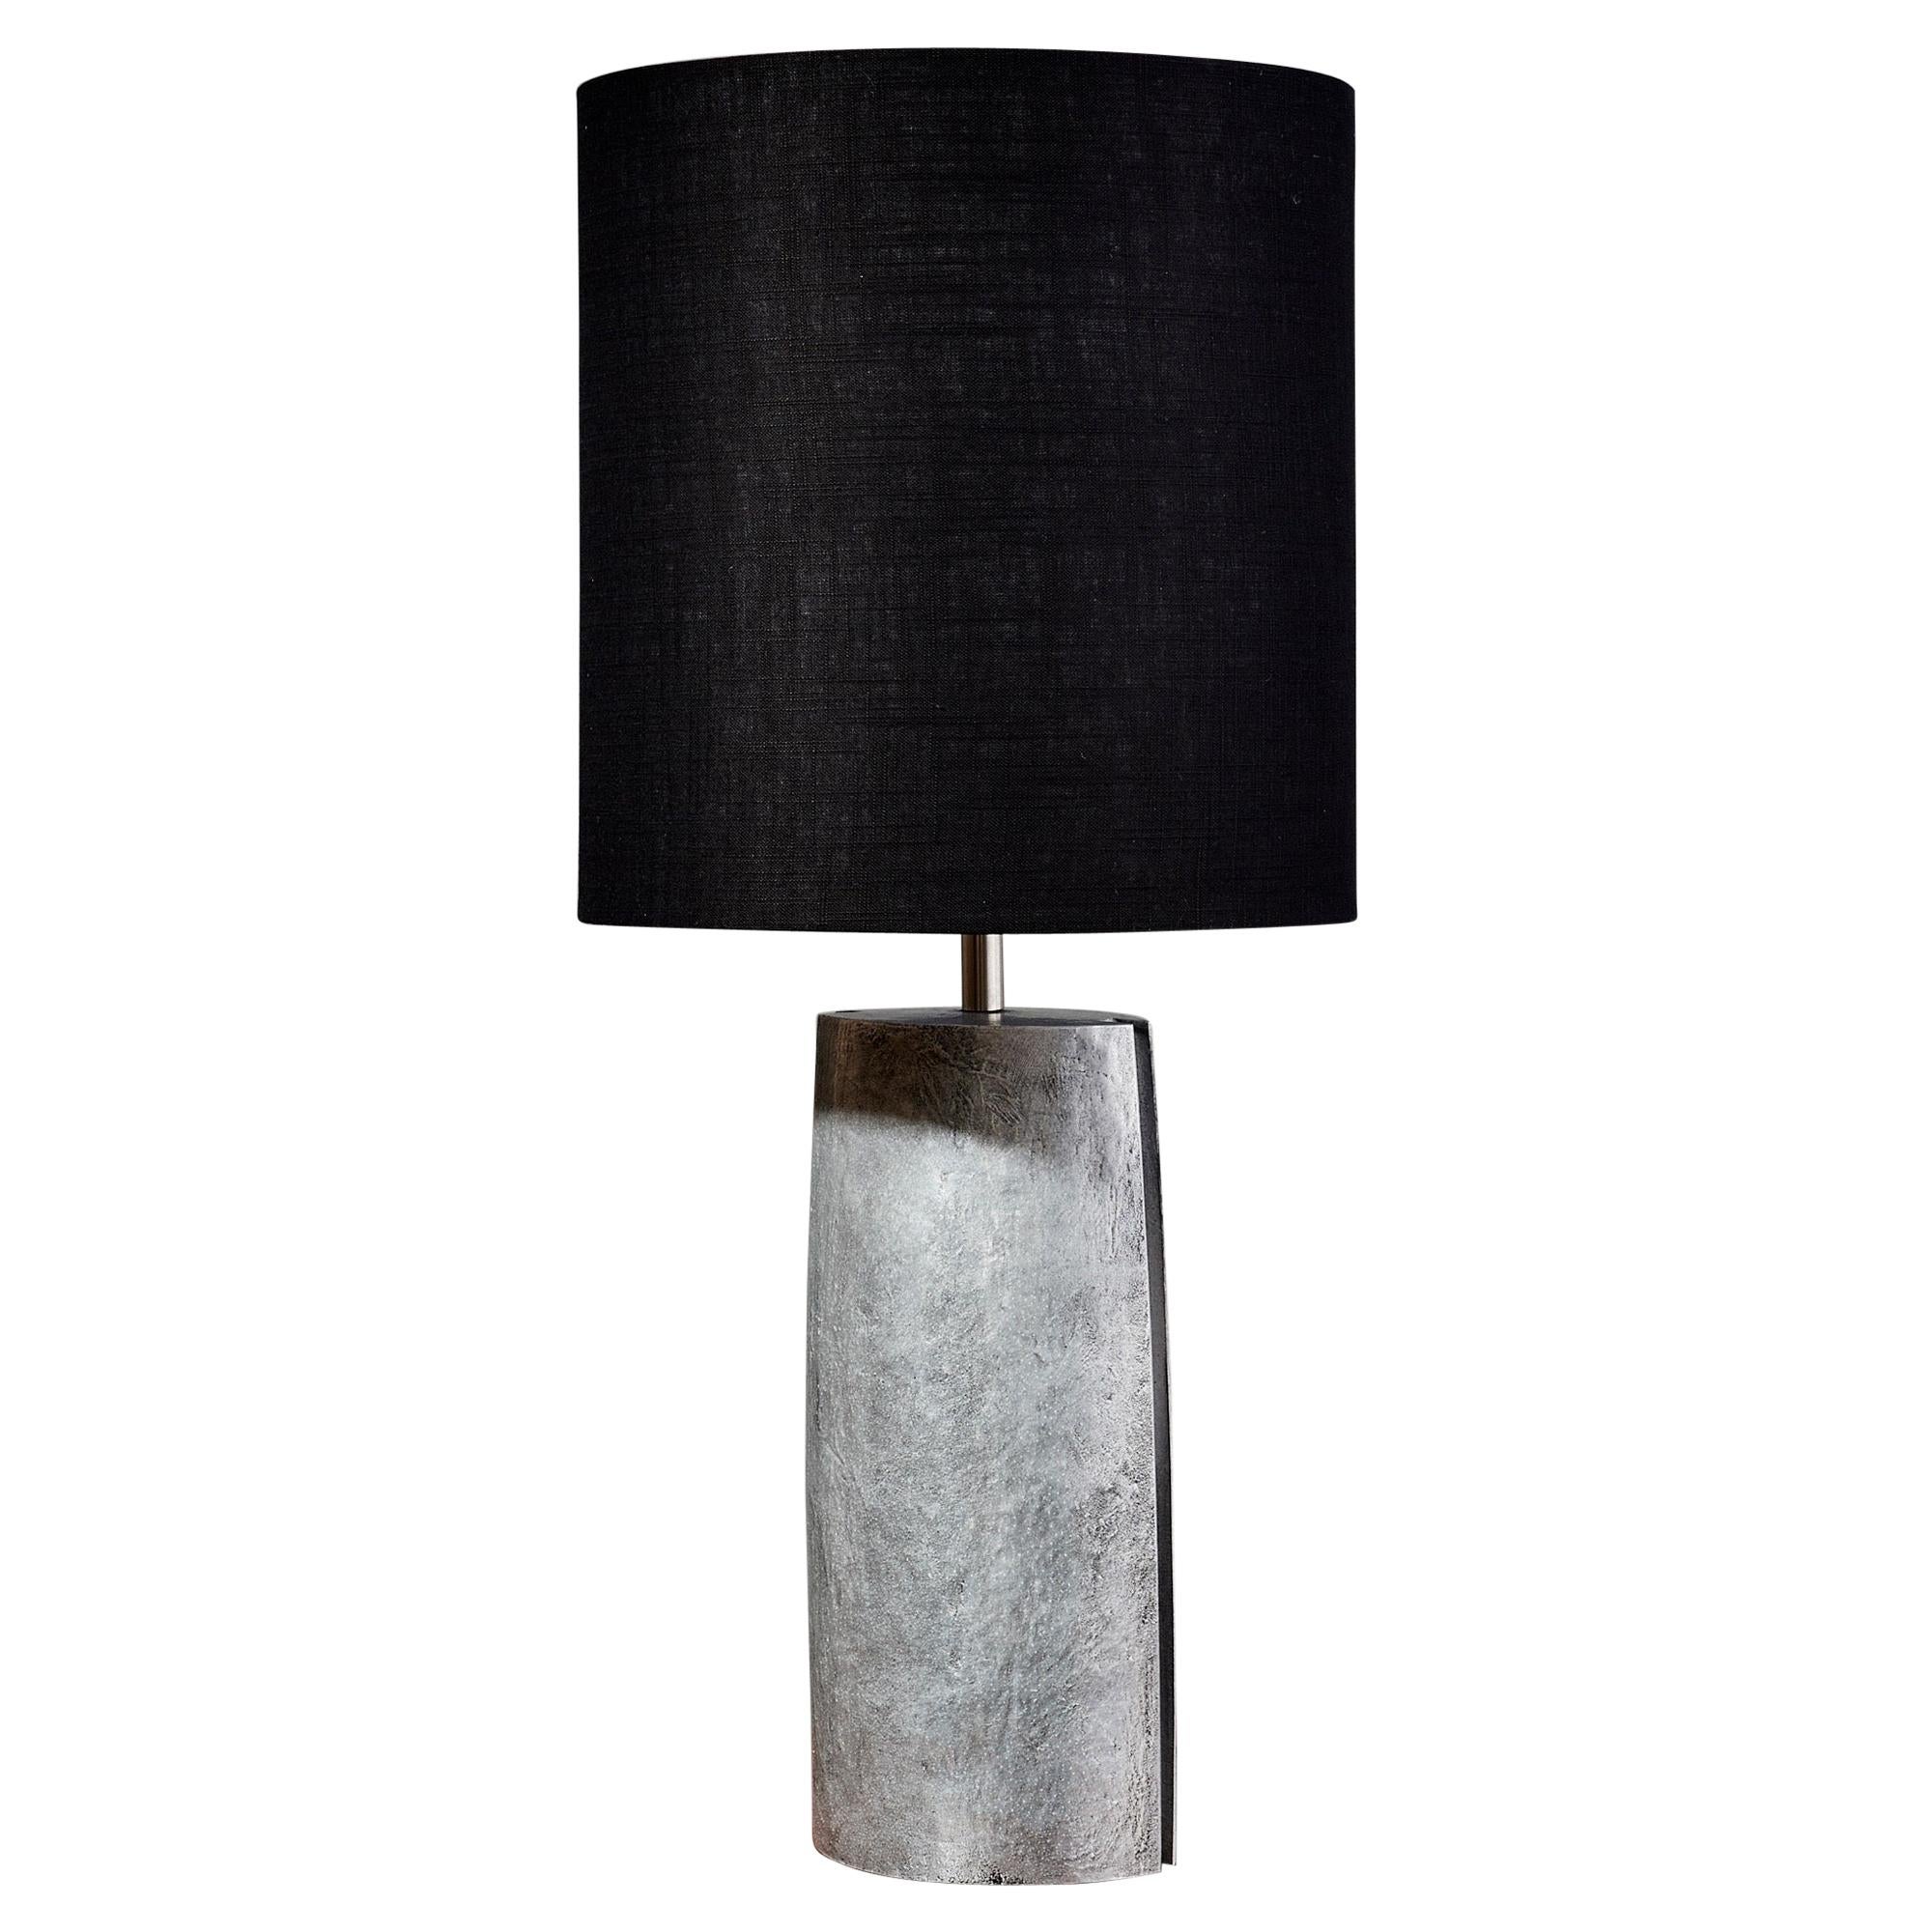 Brutalist Table Lamp in Silver Textured Aluminium with Black Shade, Italy 1970's